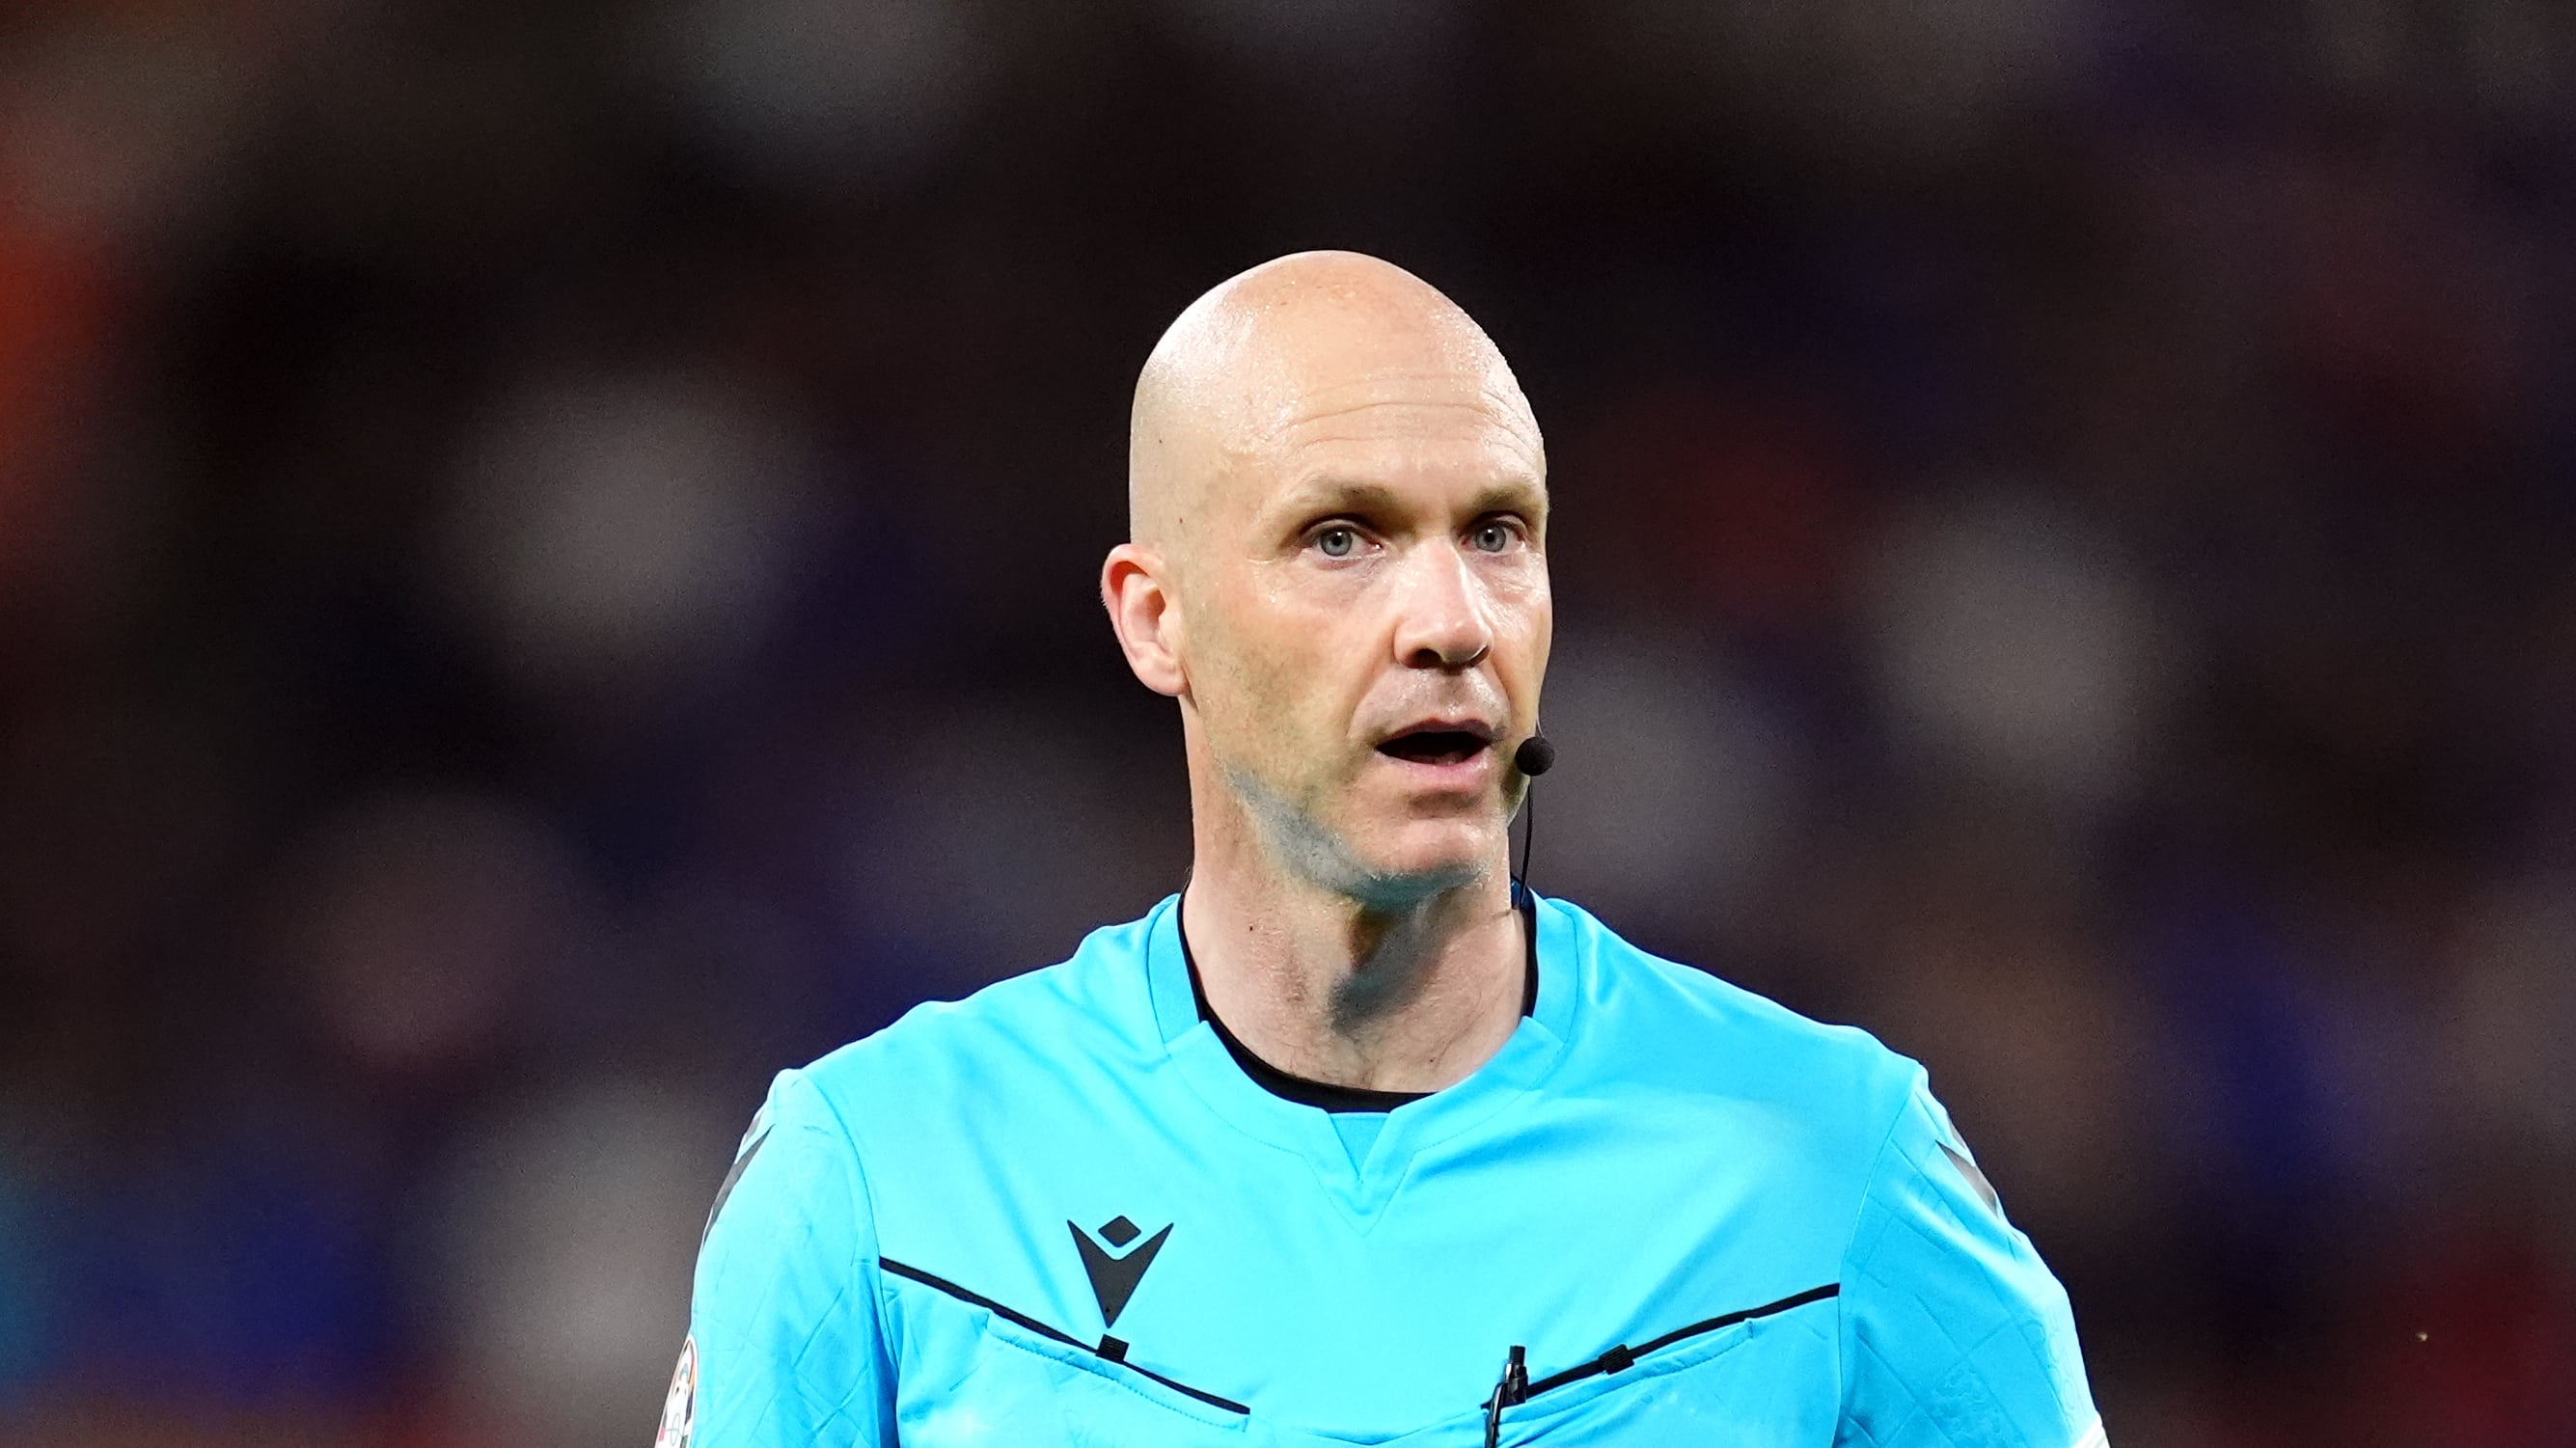 Anthony Taylor, pictured, and VAR Stuart Attwell were praised for making a “totally correct” decision to disallow a Dutch goal against France in the group stage